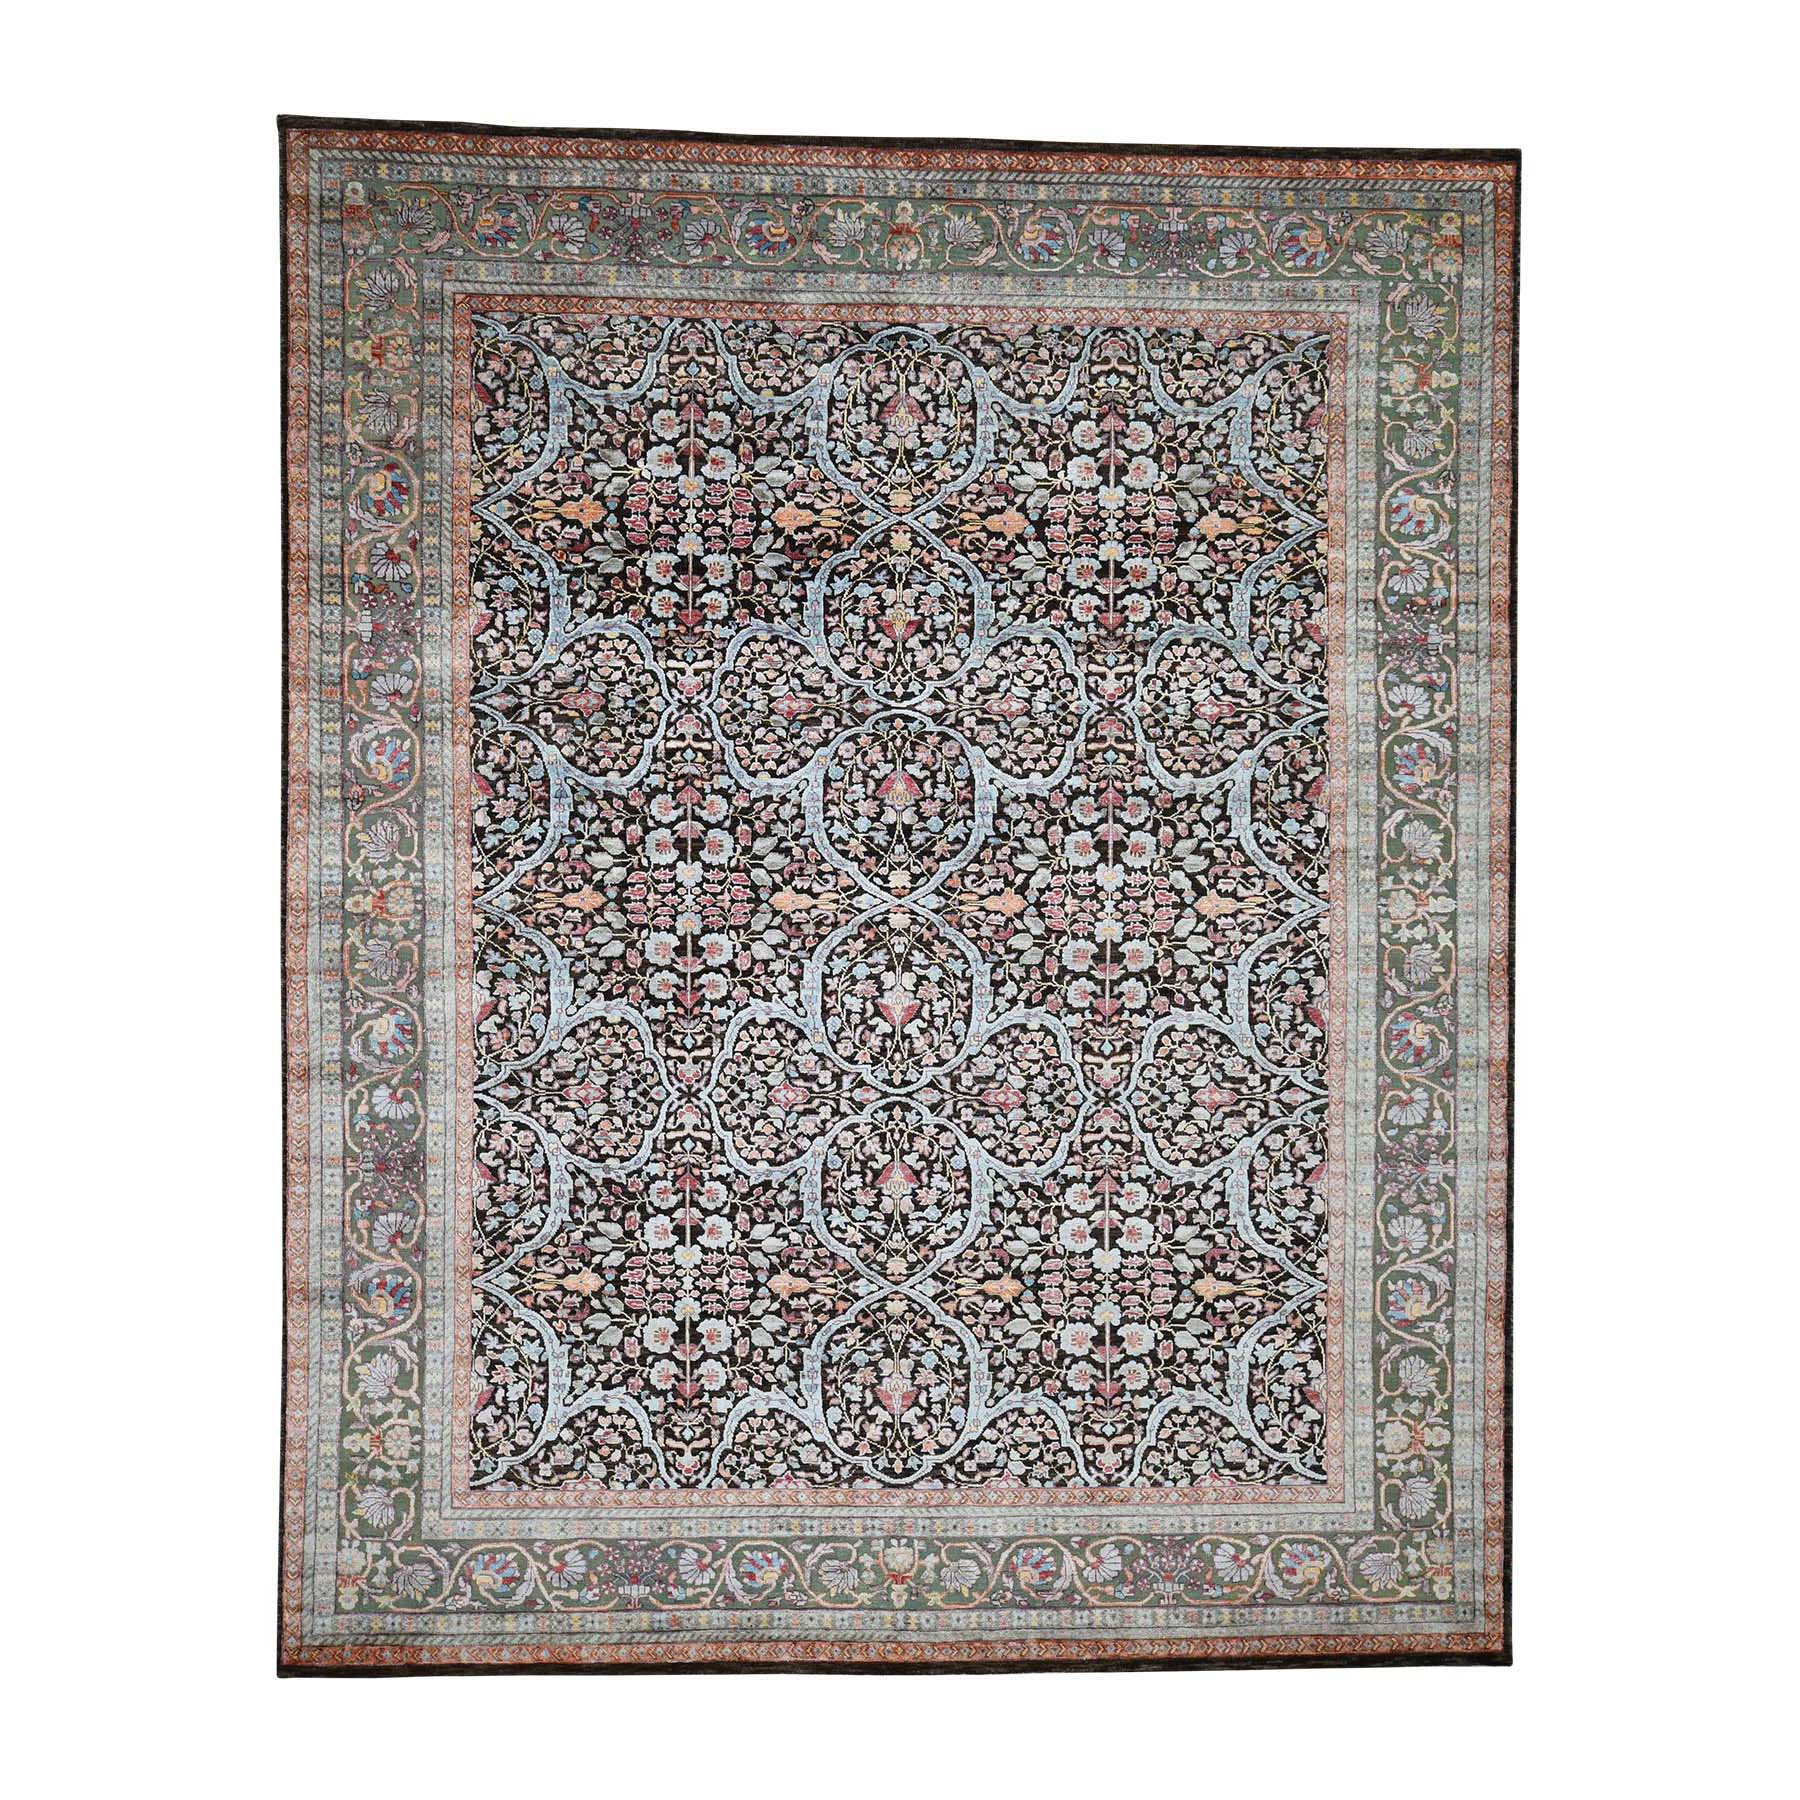 8'1"X10' Silk With Textured Wool Kashan Design Hand-Knotted Oriental Rug moadb996